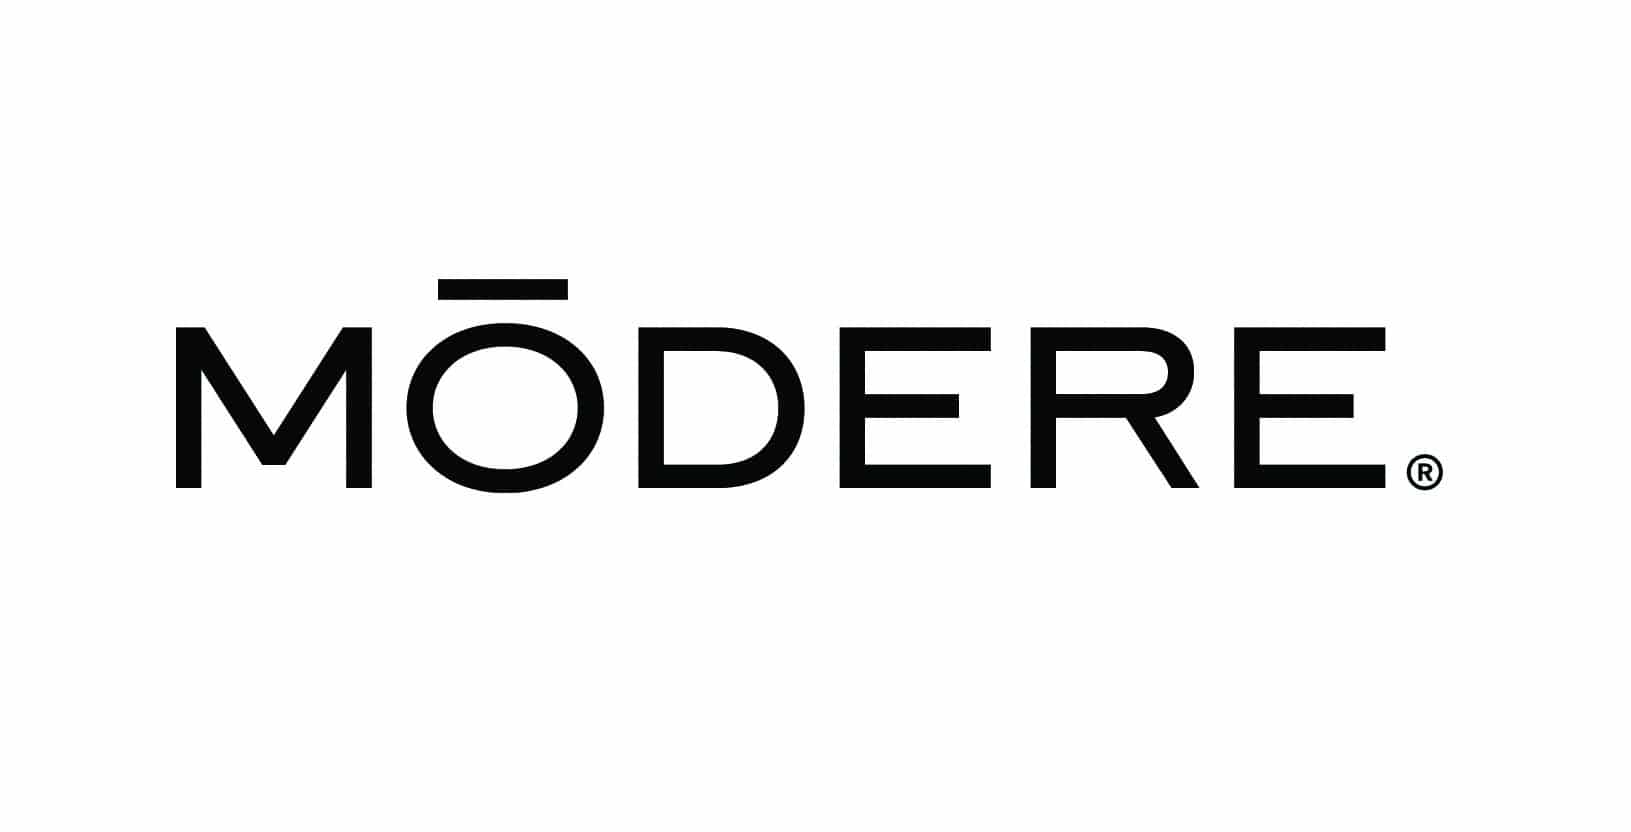 Modere Logos High Res Final Registered 3 - $10 off your first purchase